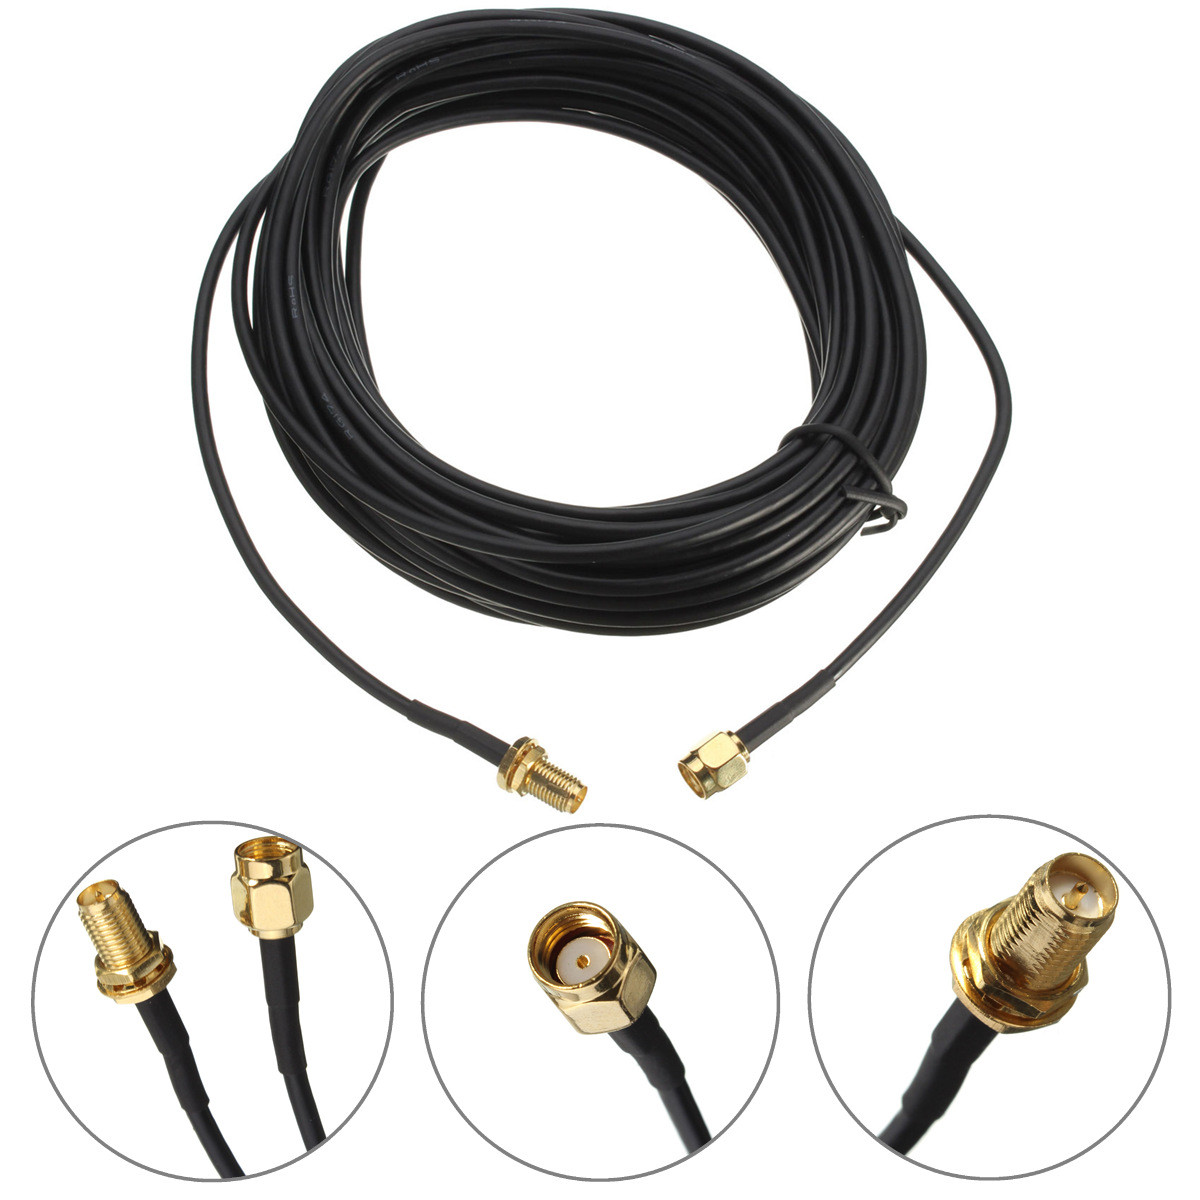 

RG174 1M/5M RP-SMA Male to Female Wifi Antenna Extension Cable for Wireless Network Card Router AP